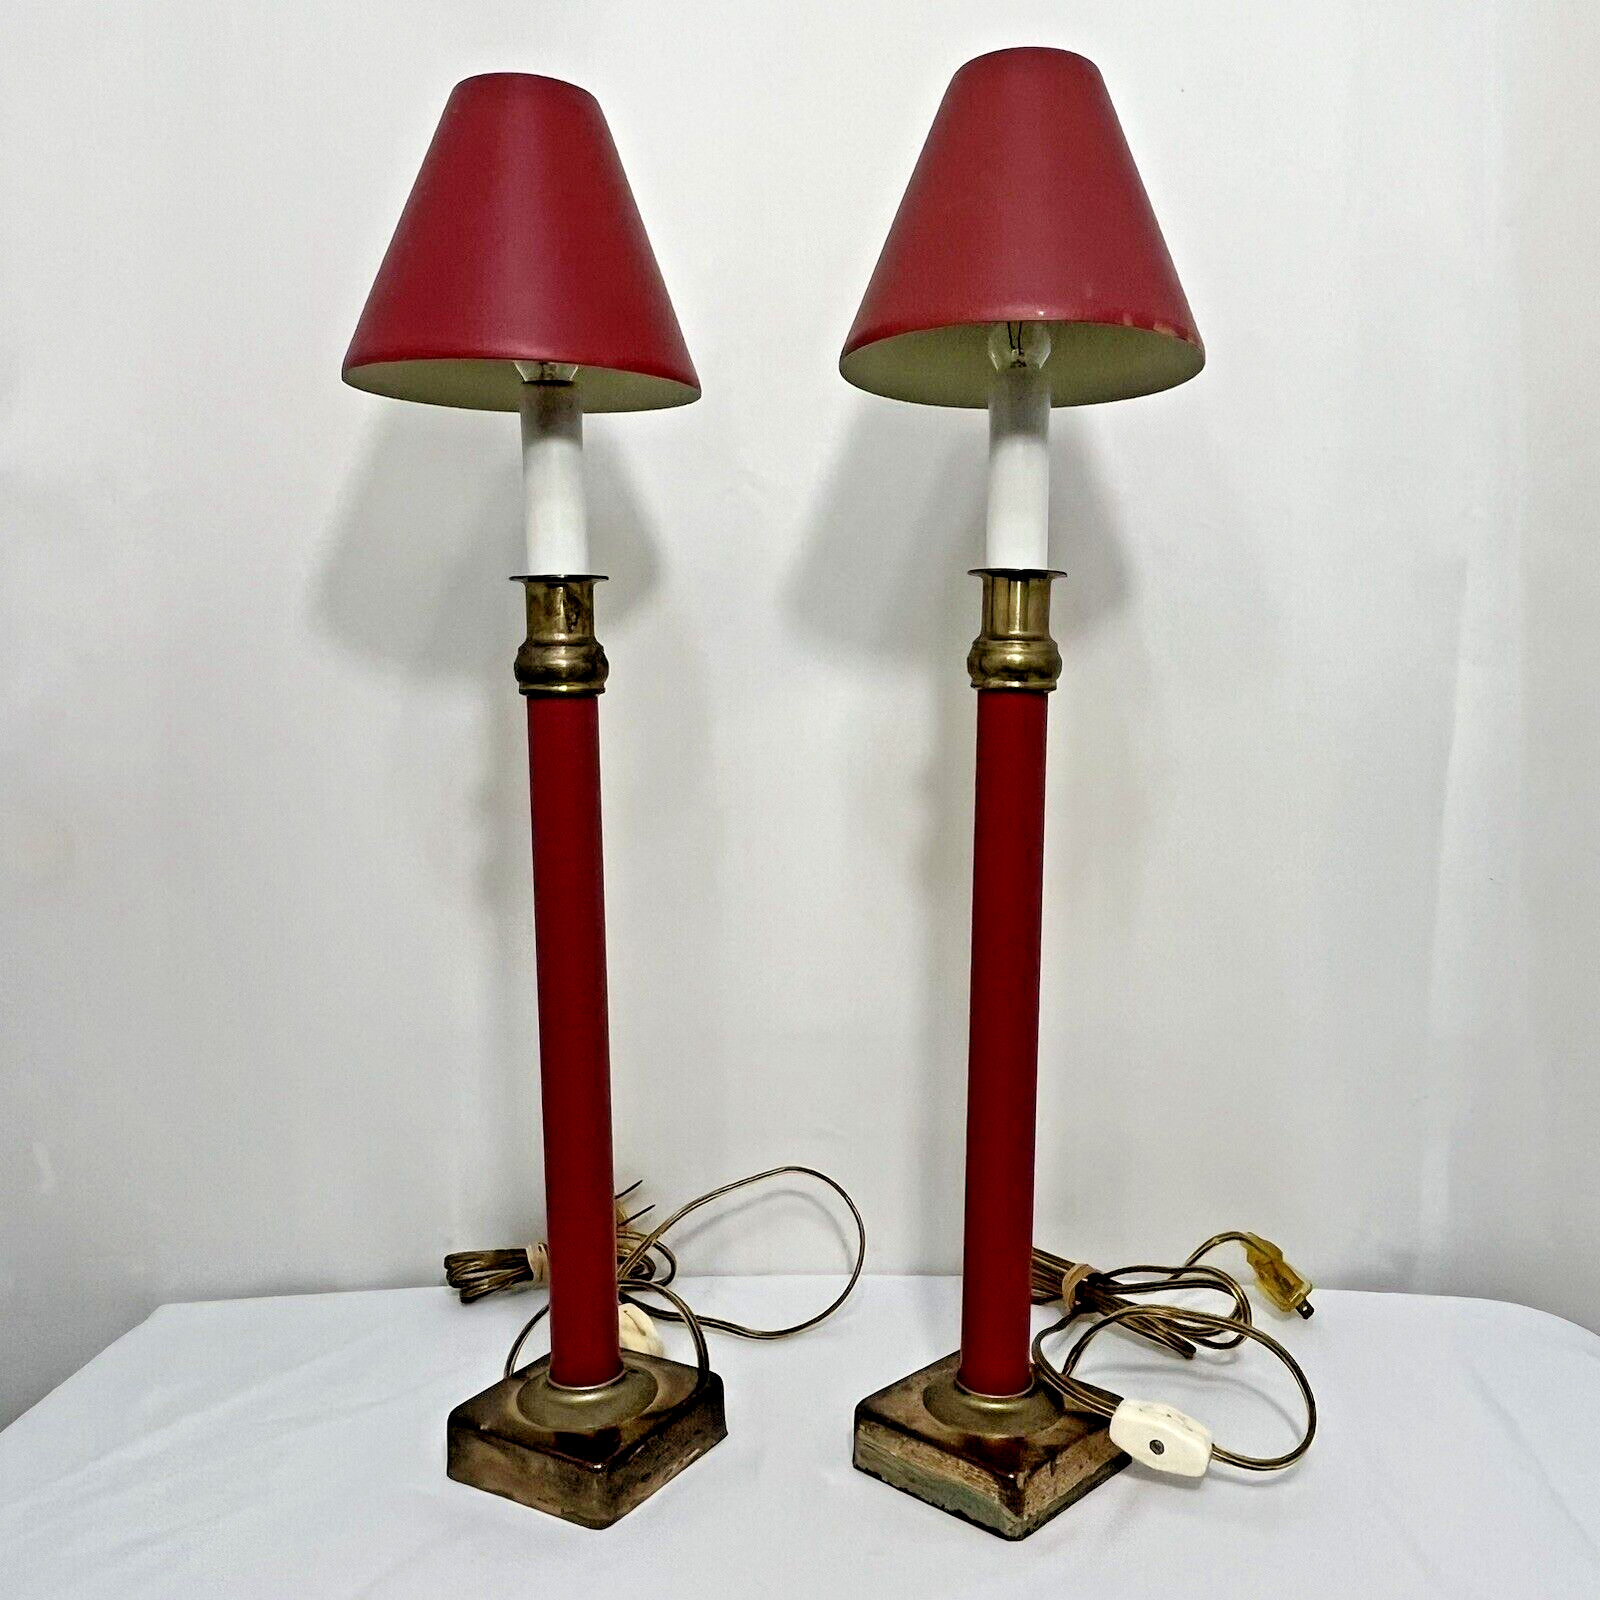 Vintage Pair Of Electric Candlestick Lamps With Metal Shades Red Burgundy Brass